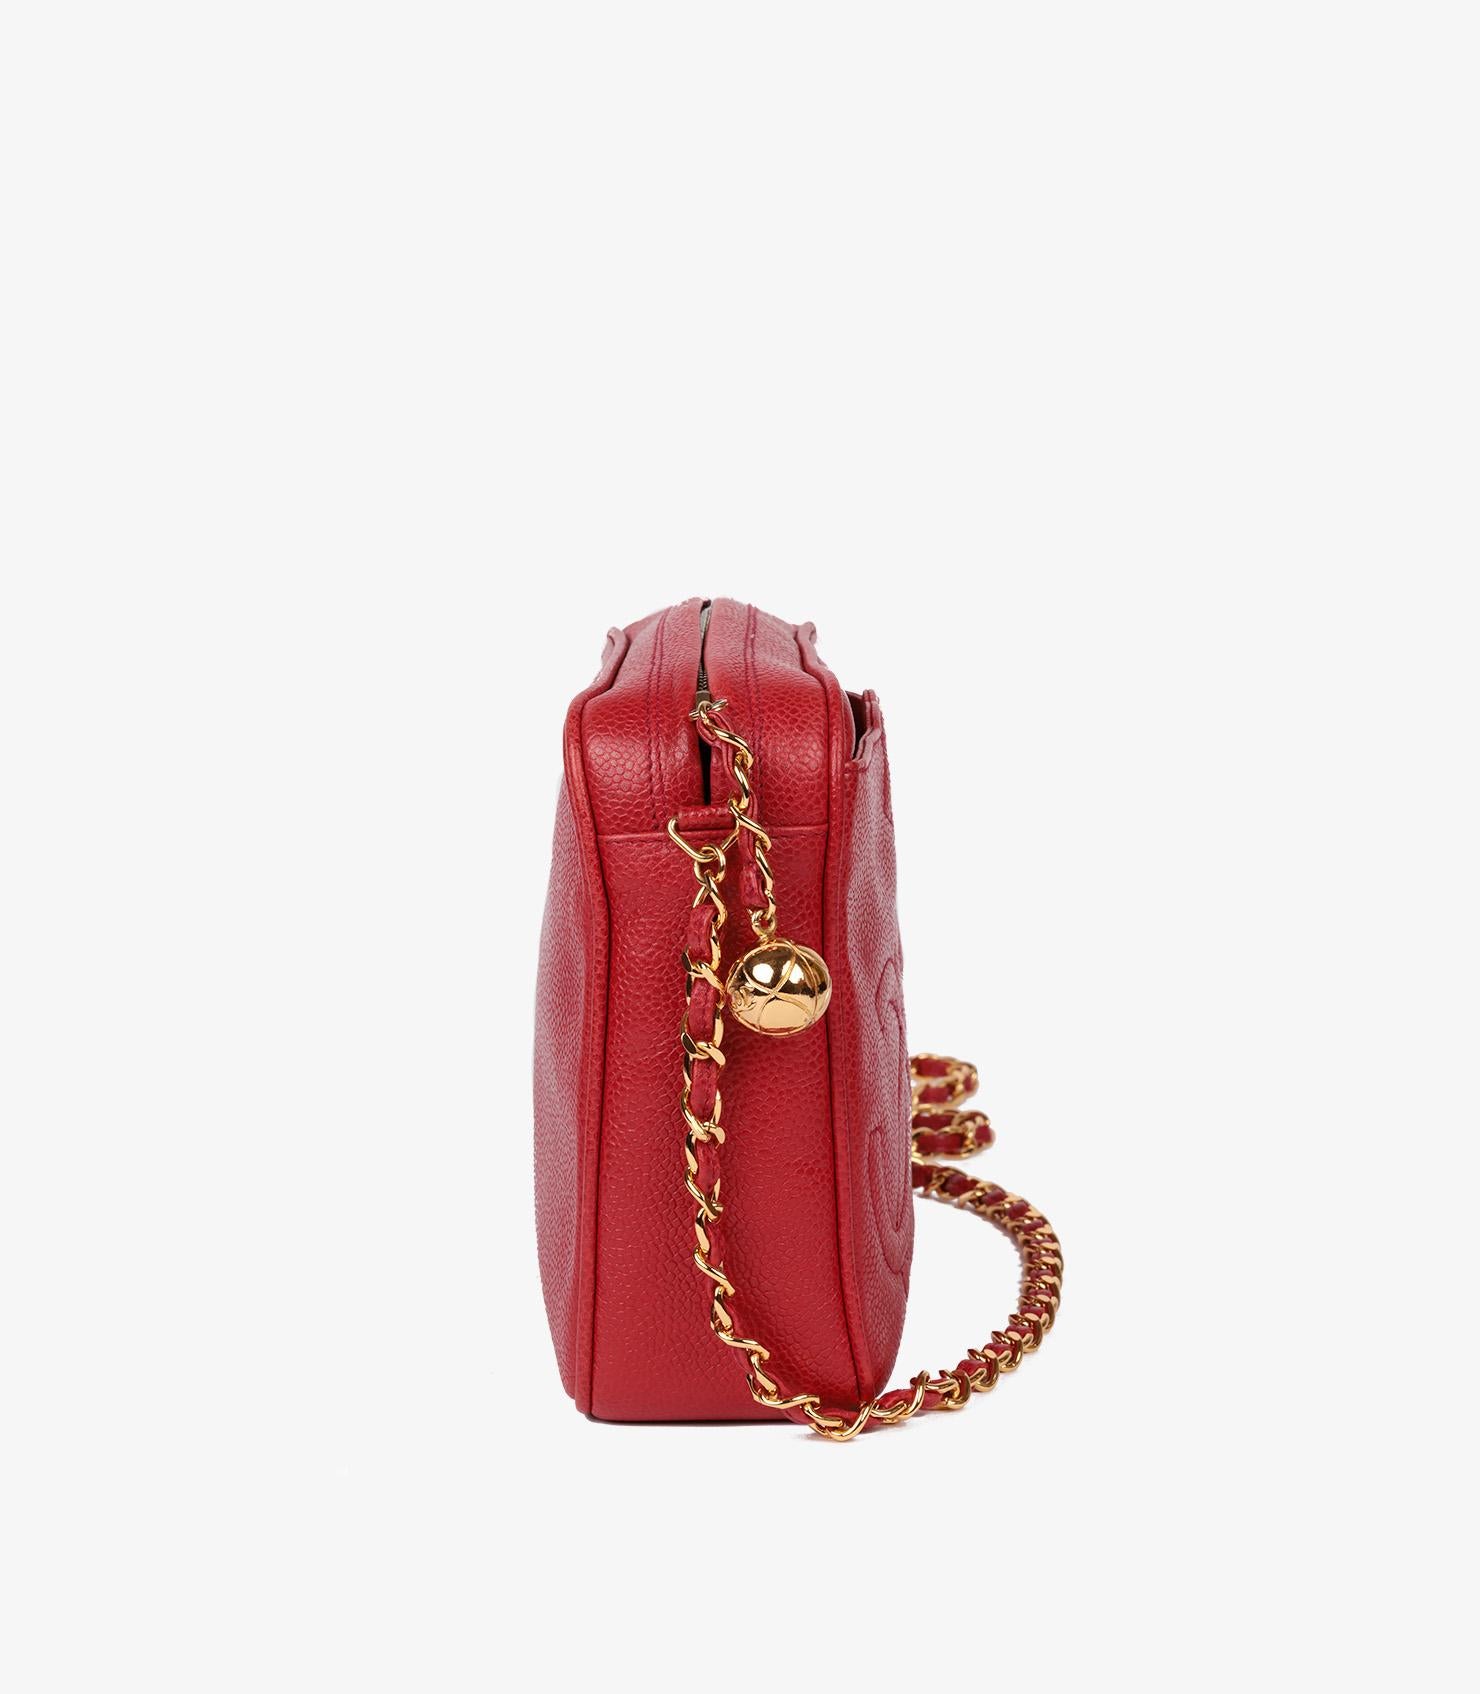 Women's Chanel Red Caviar Leather Vintage Timeless Camera Bag For Sale